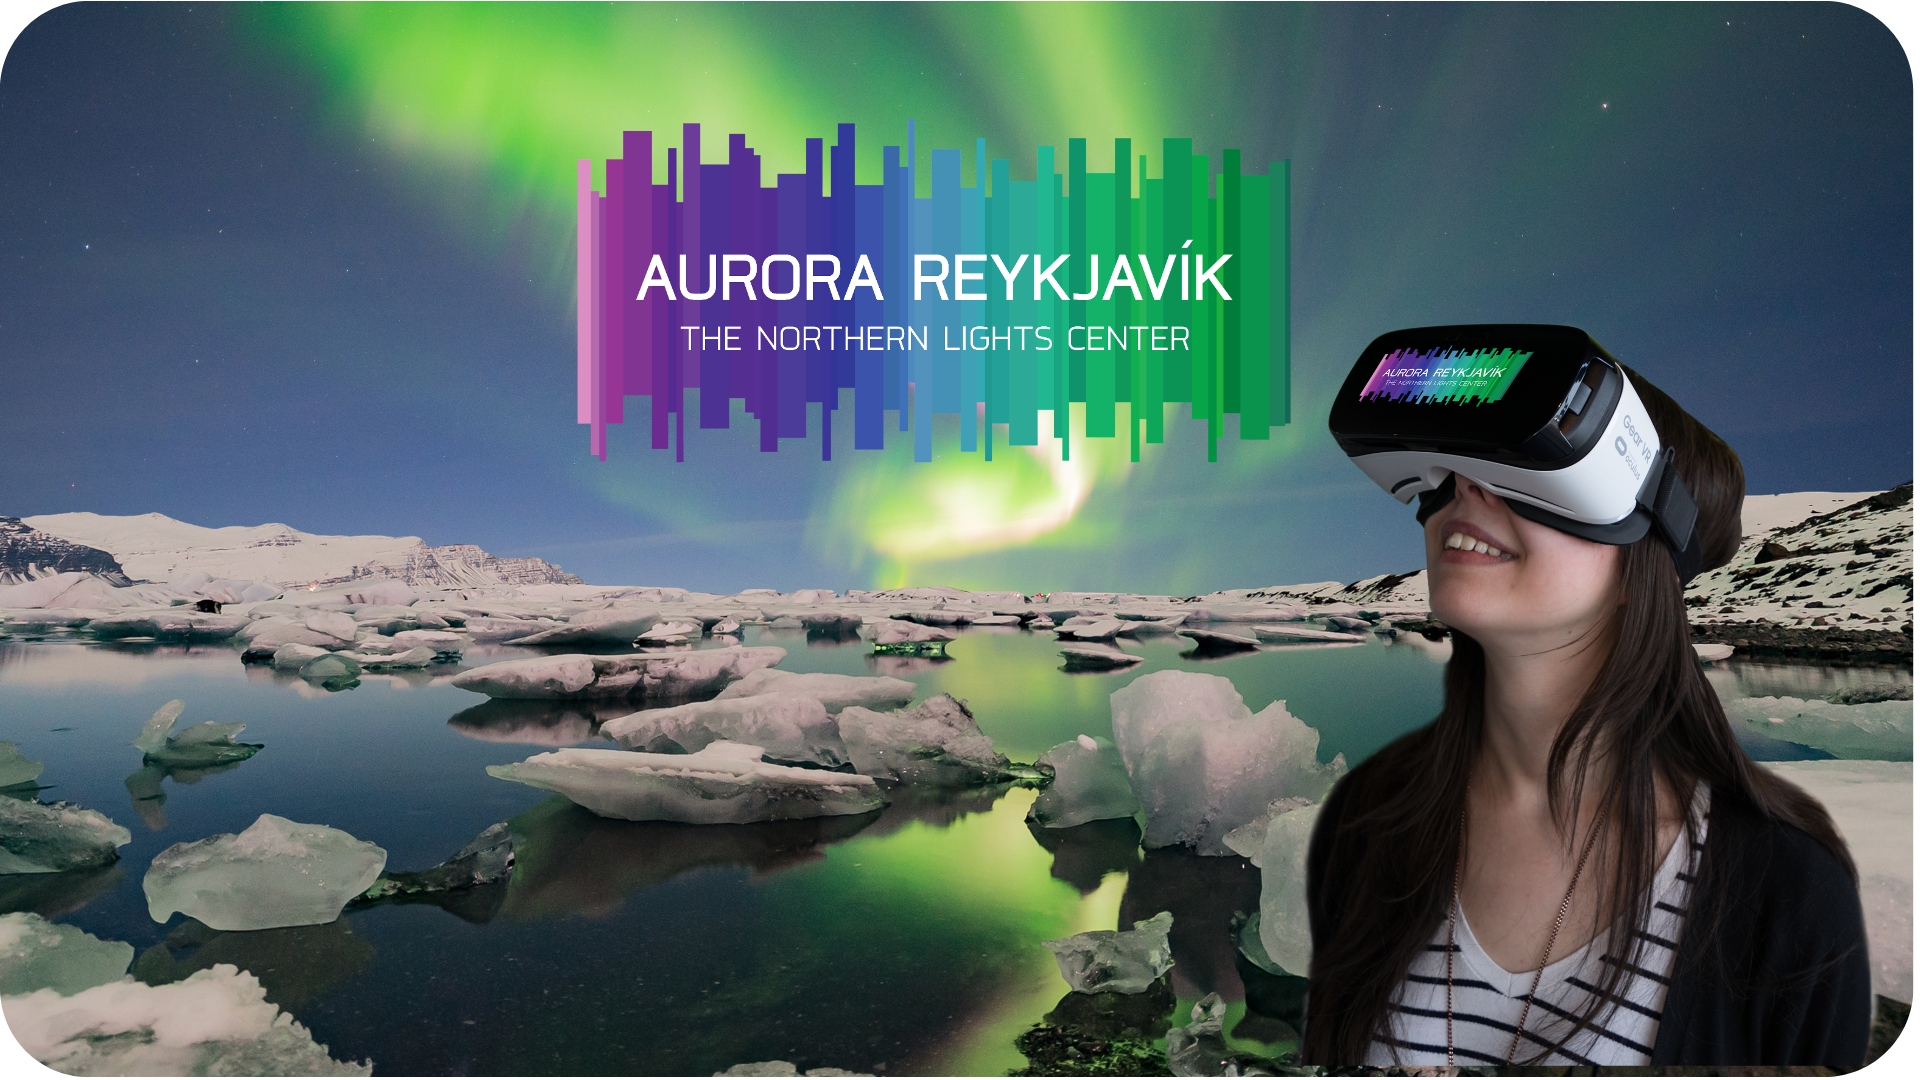 Guests joining the Best Northern Lights Tour in Iceland including a visit to Aurora Reykjavik, The Northern Lights Center